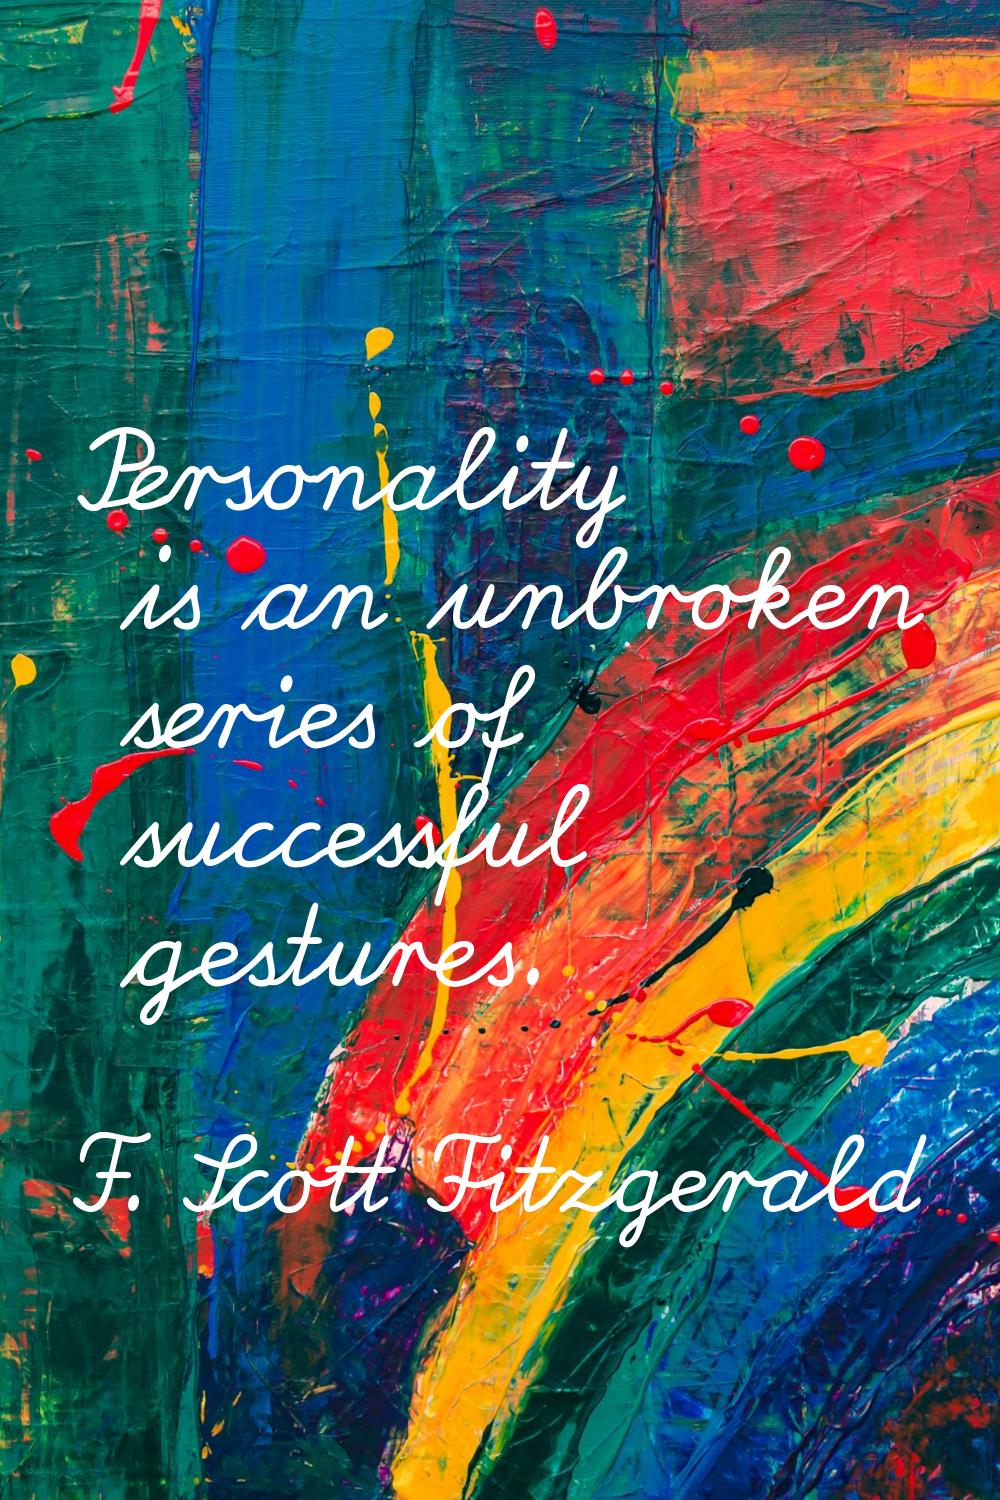 Personality is an unbroken series of successful gestures.